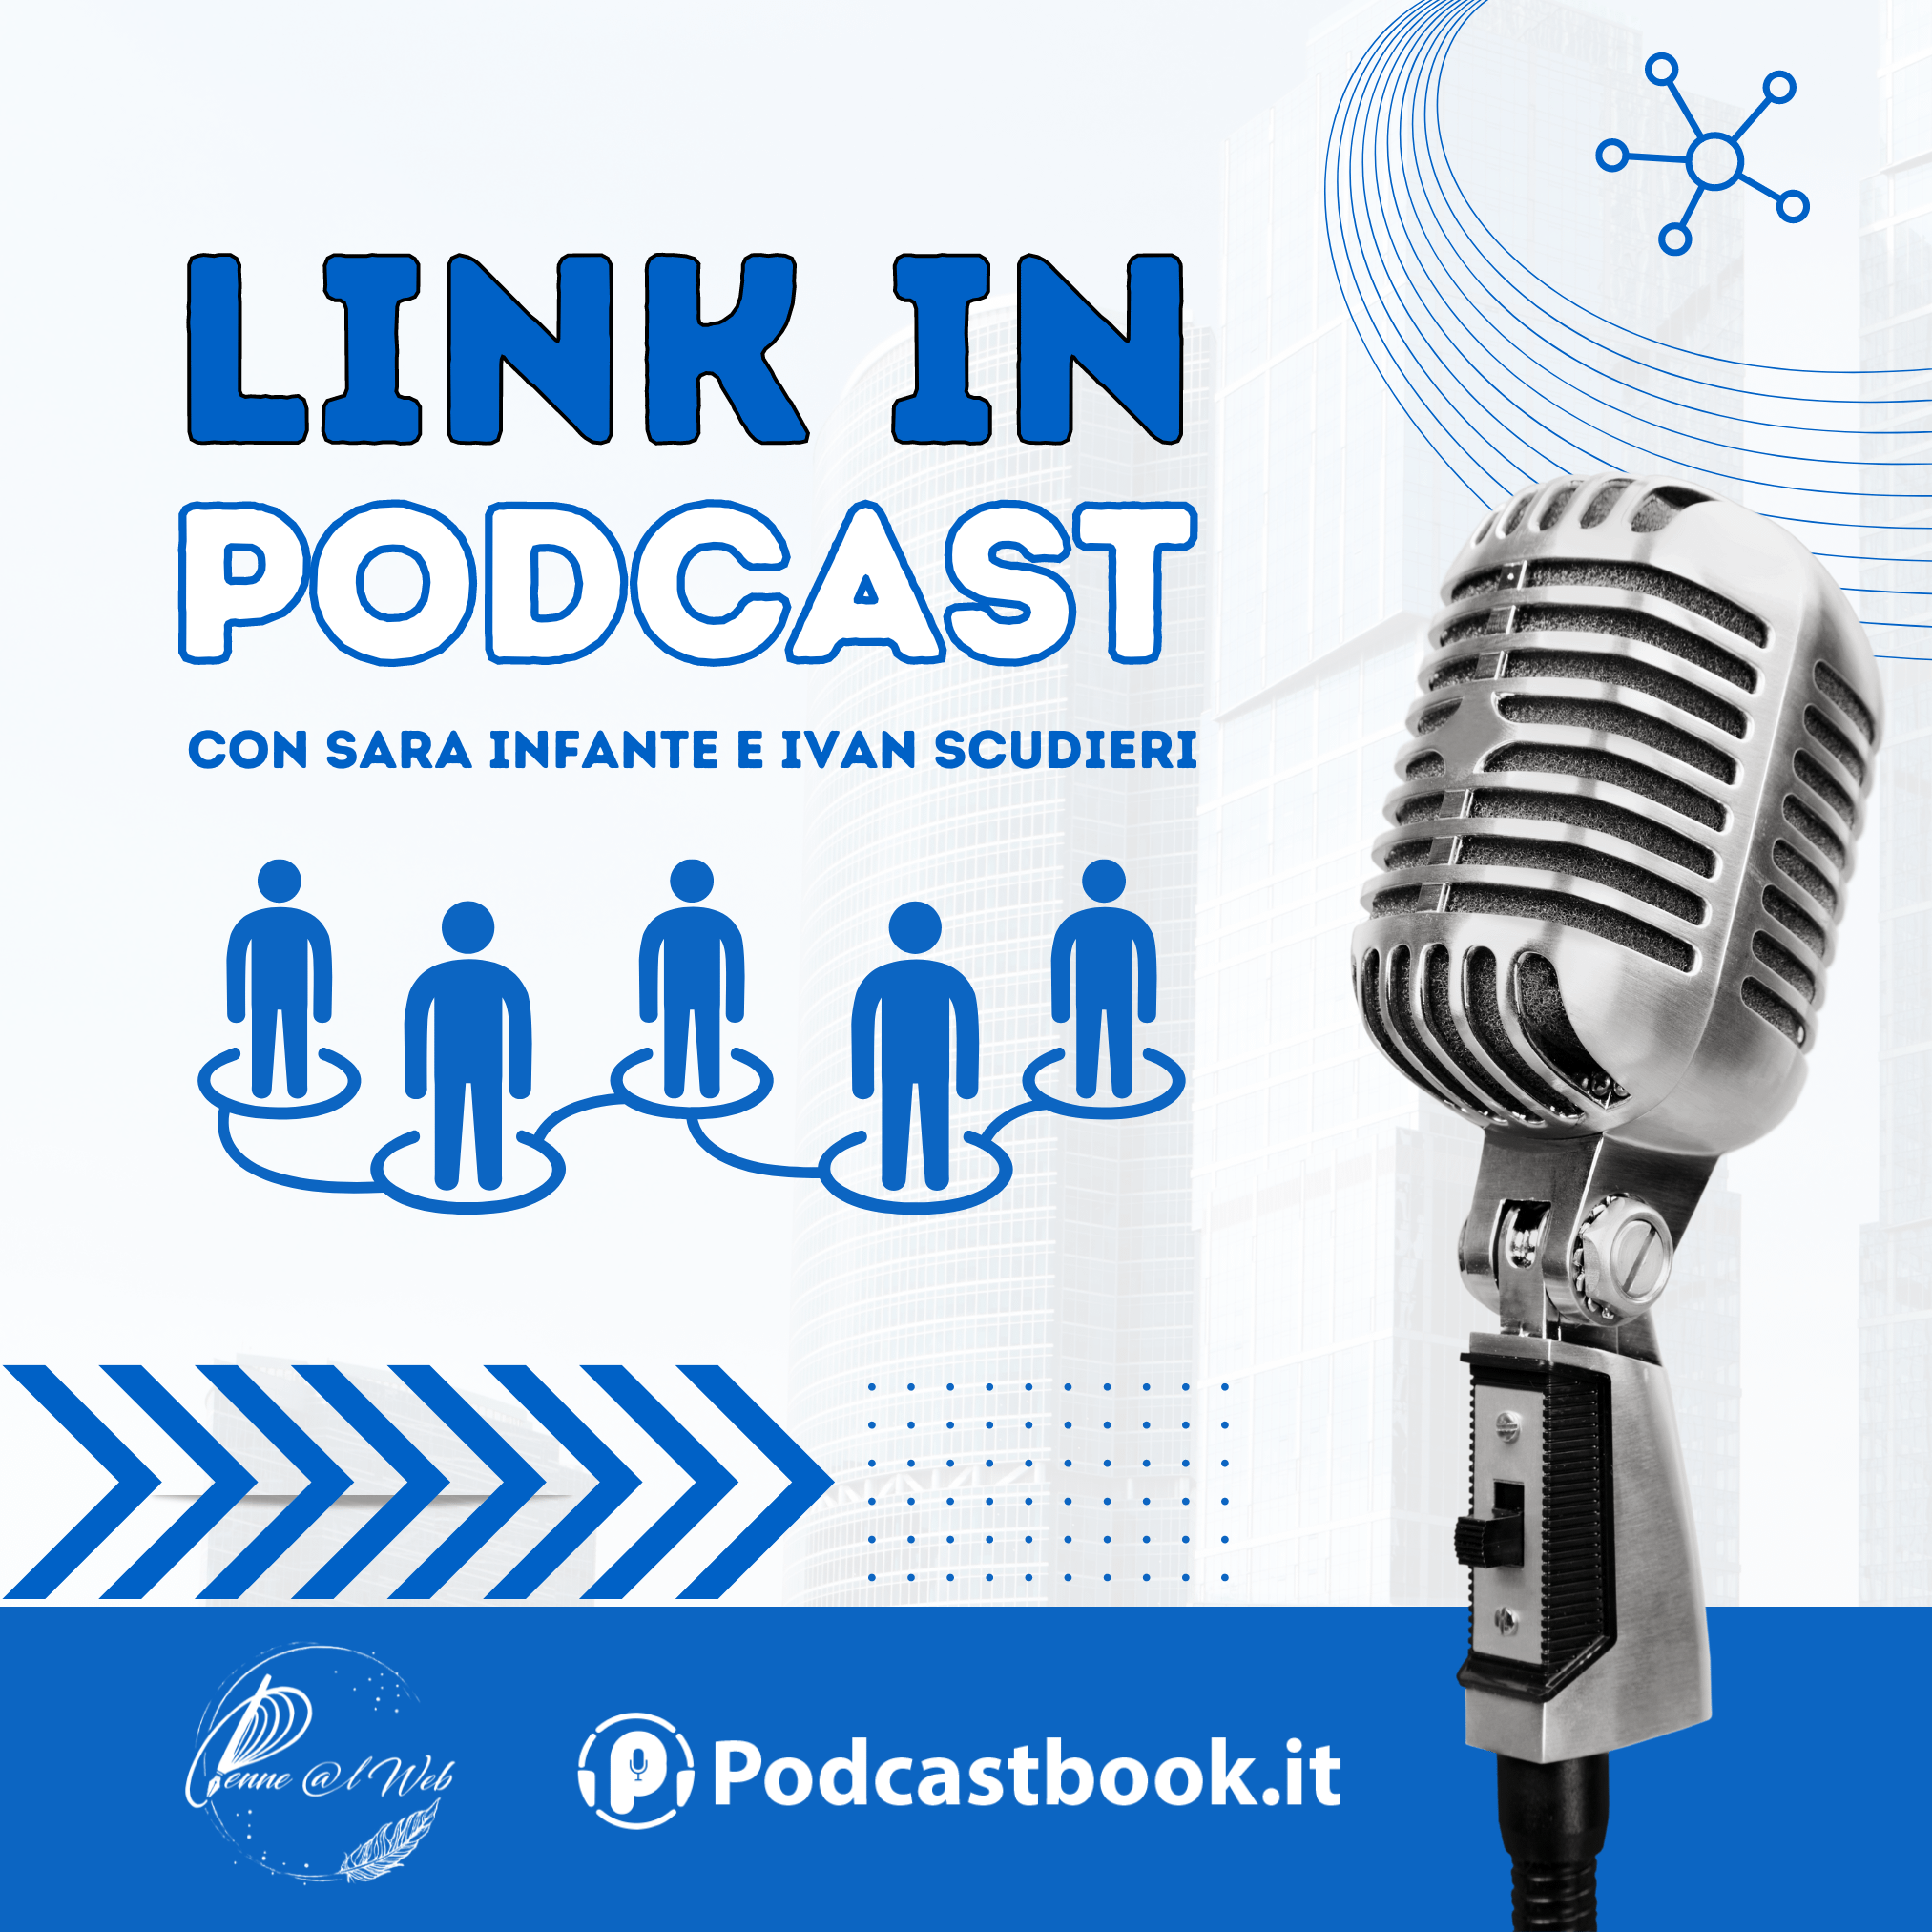 Link in podcast